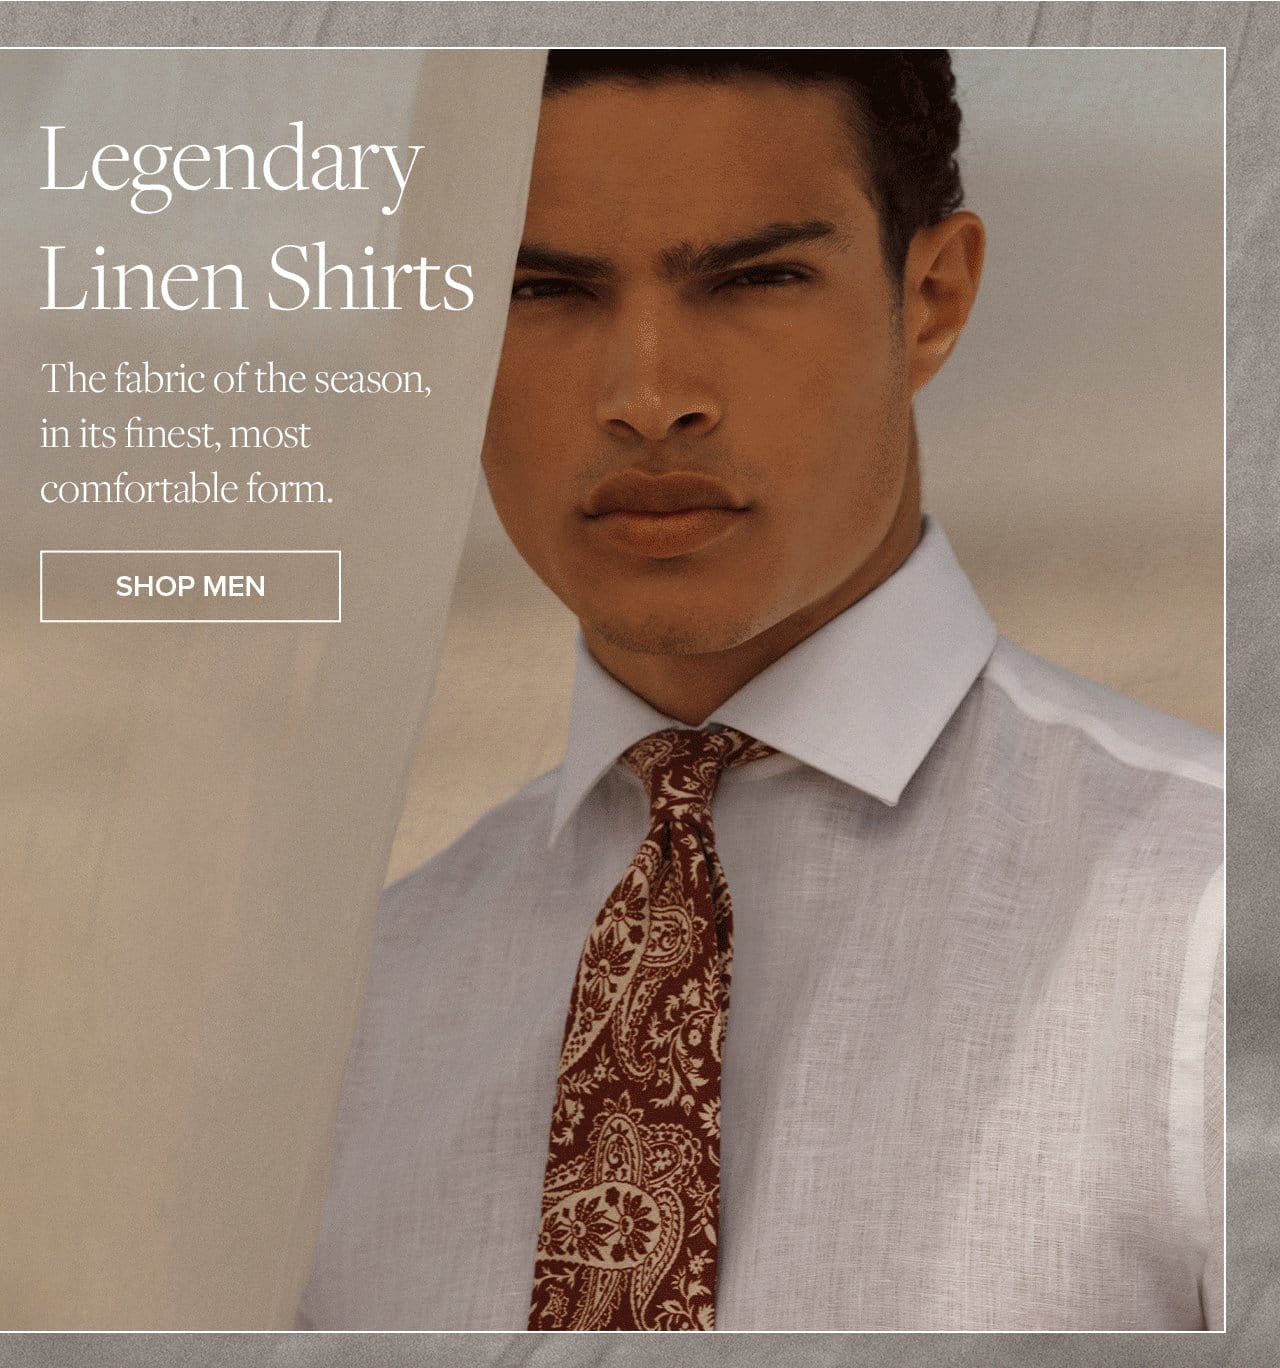 Legendary Linen Shirts. The fabric of the season, in its finest, most comfortable form. Shop Men